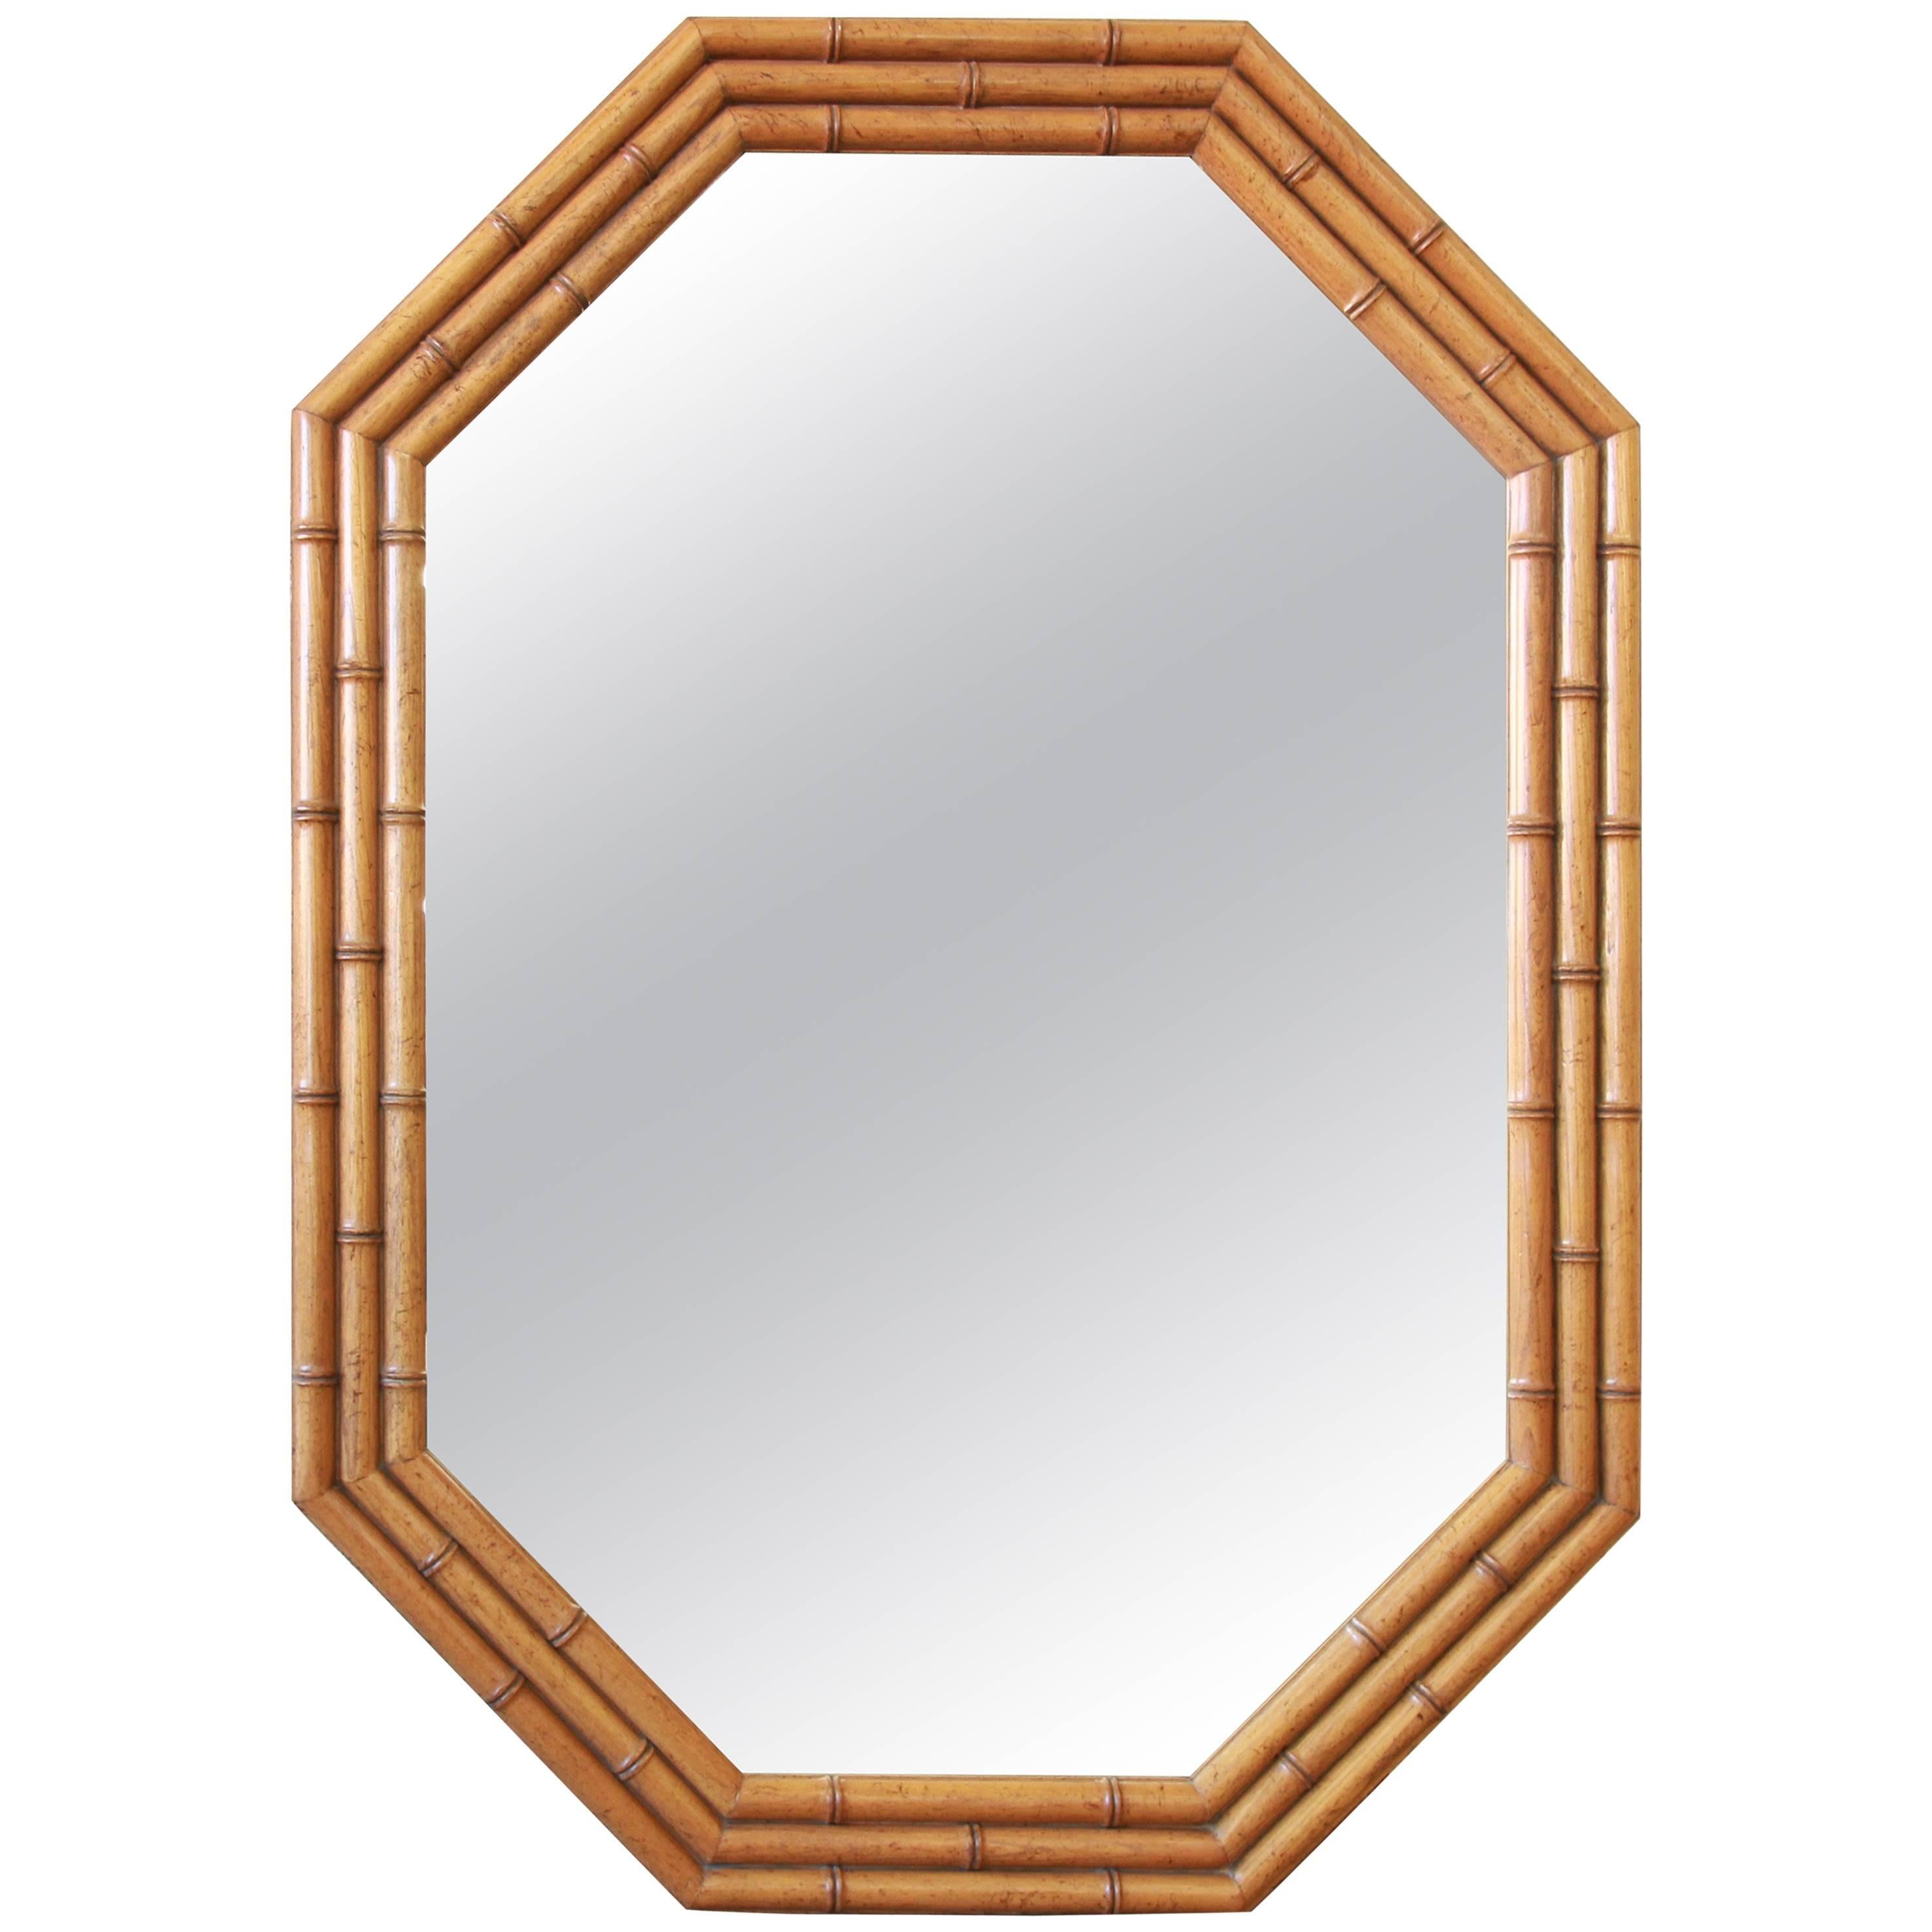 Baker Furniture Faux Bamboo Large Octagonal Hollywood Regency Chinoiserie Mirror